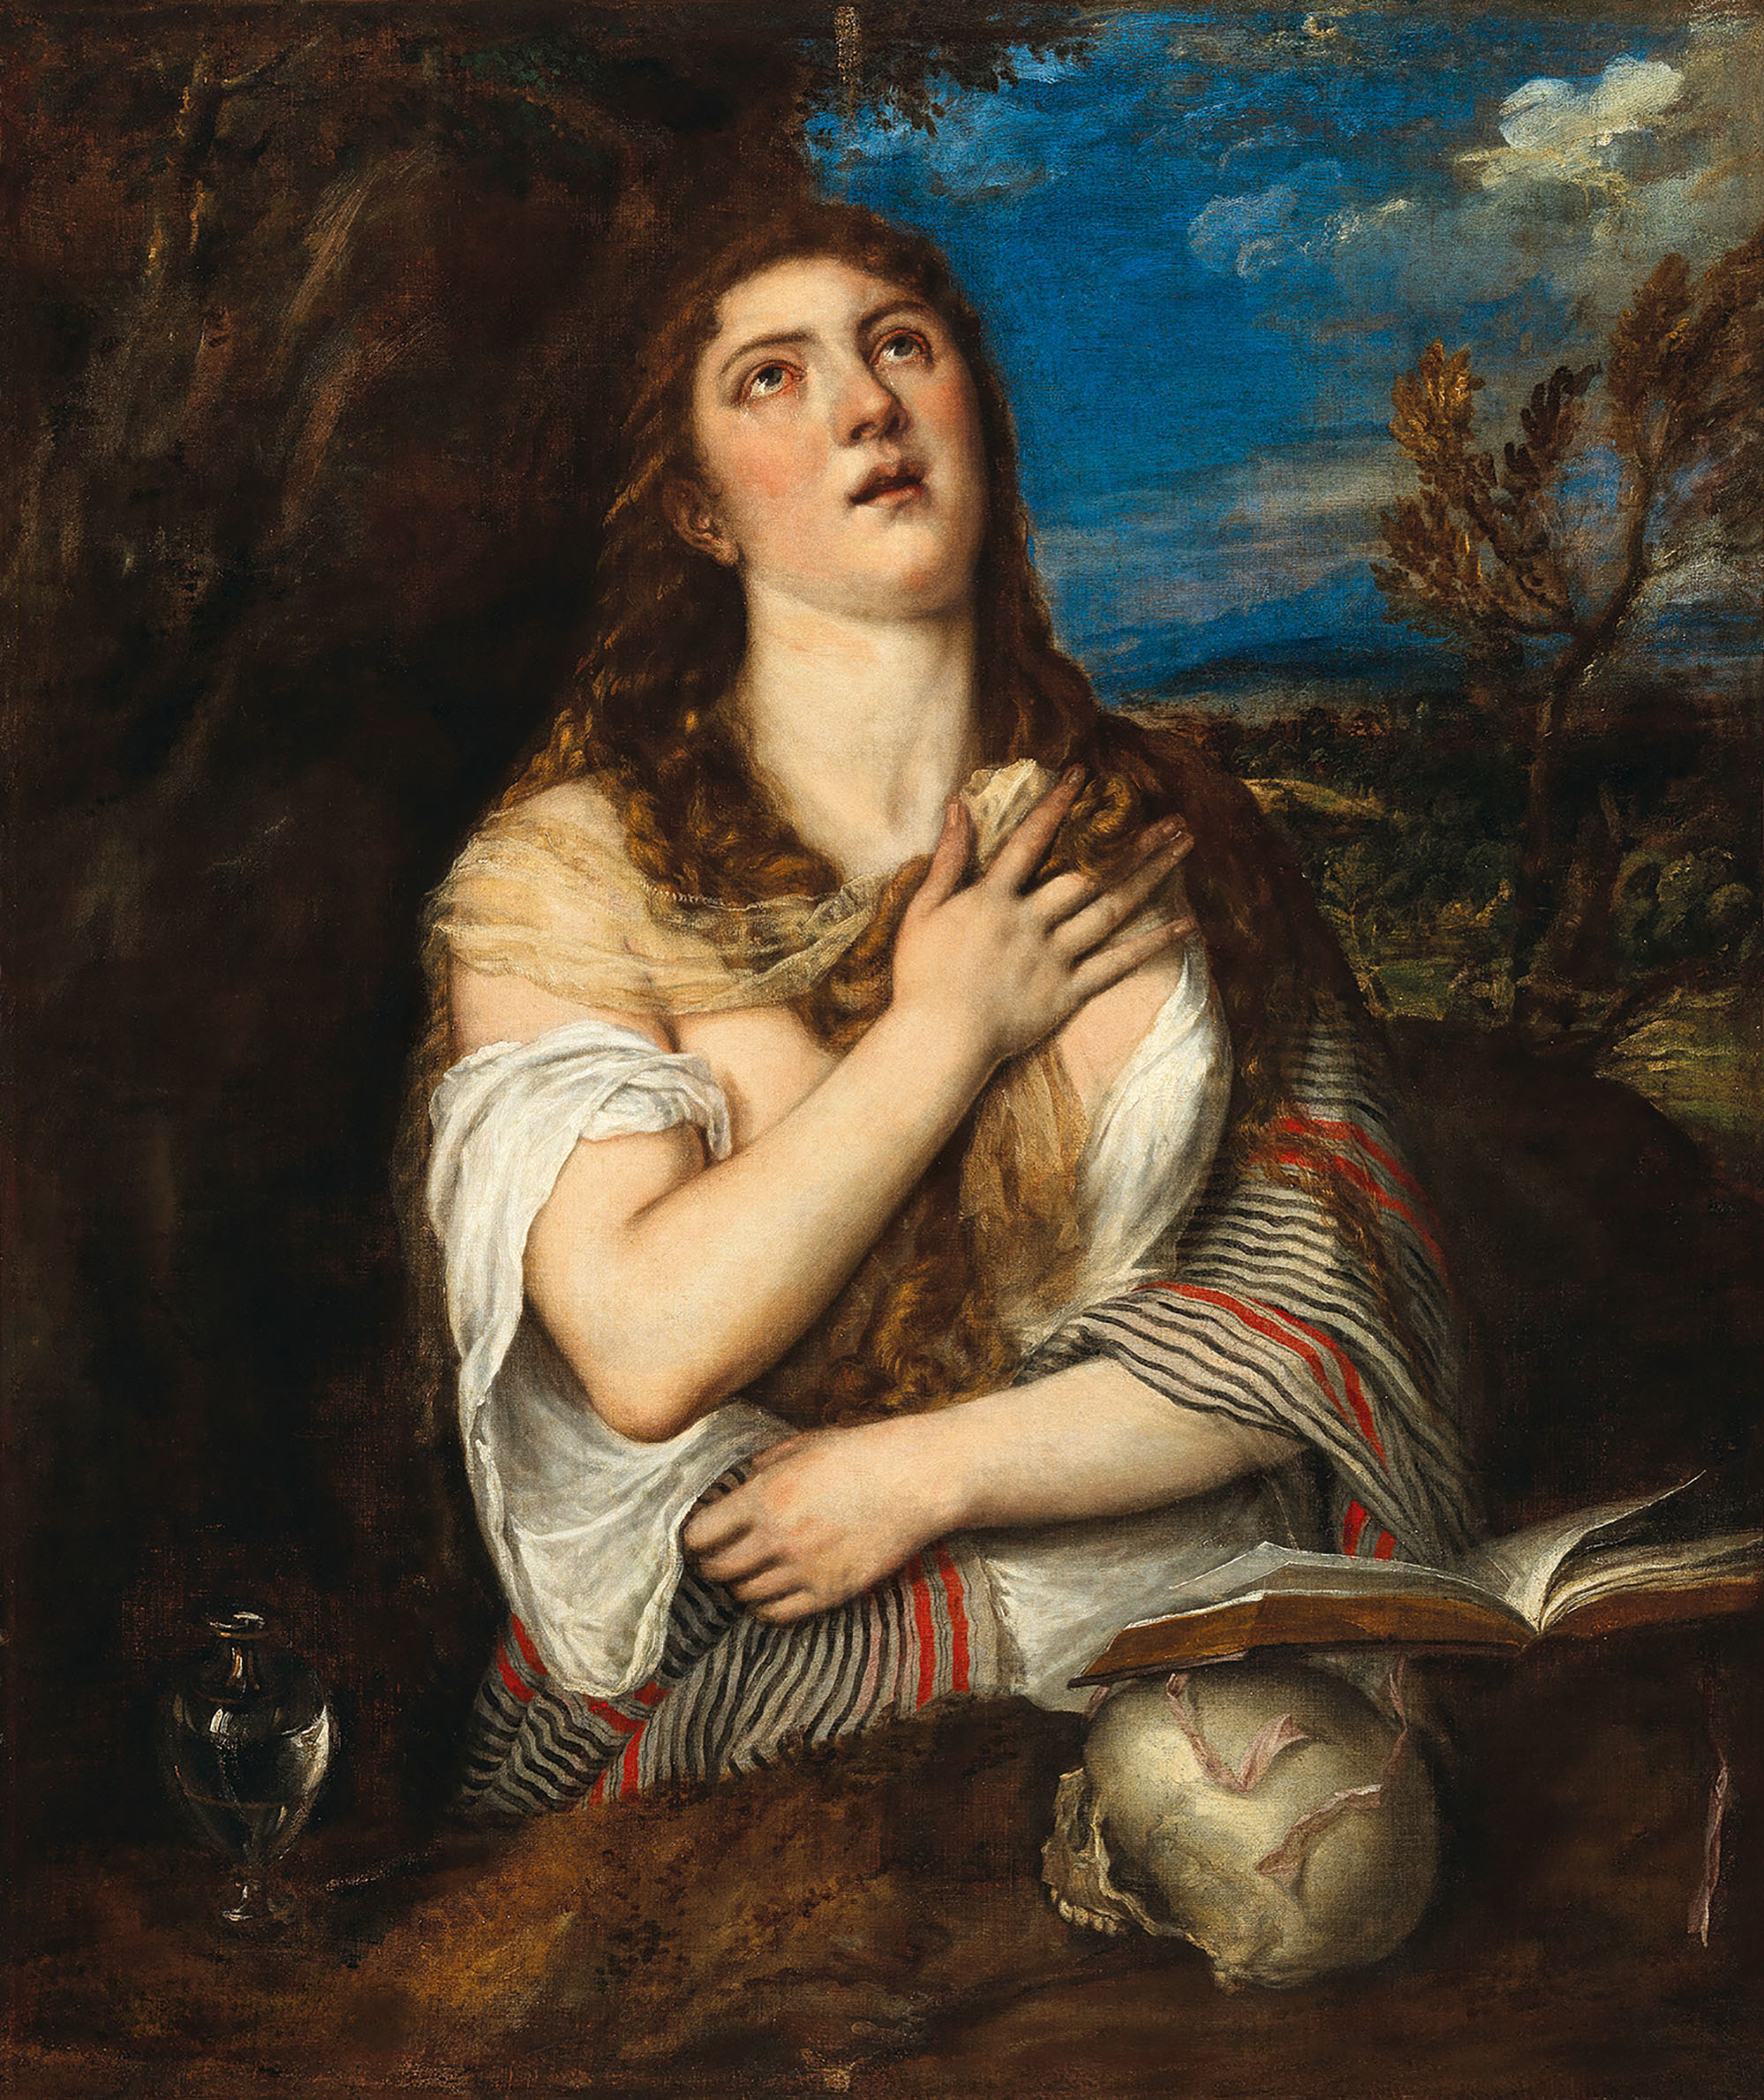 Read more about the article BARGAIN PRICE: Titian Masterpiece Snapped Up For 70 GBP Now Sold For 4.1 Million Pounds